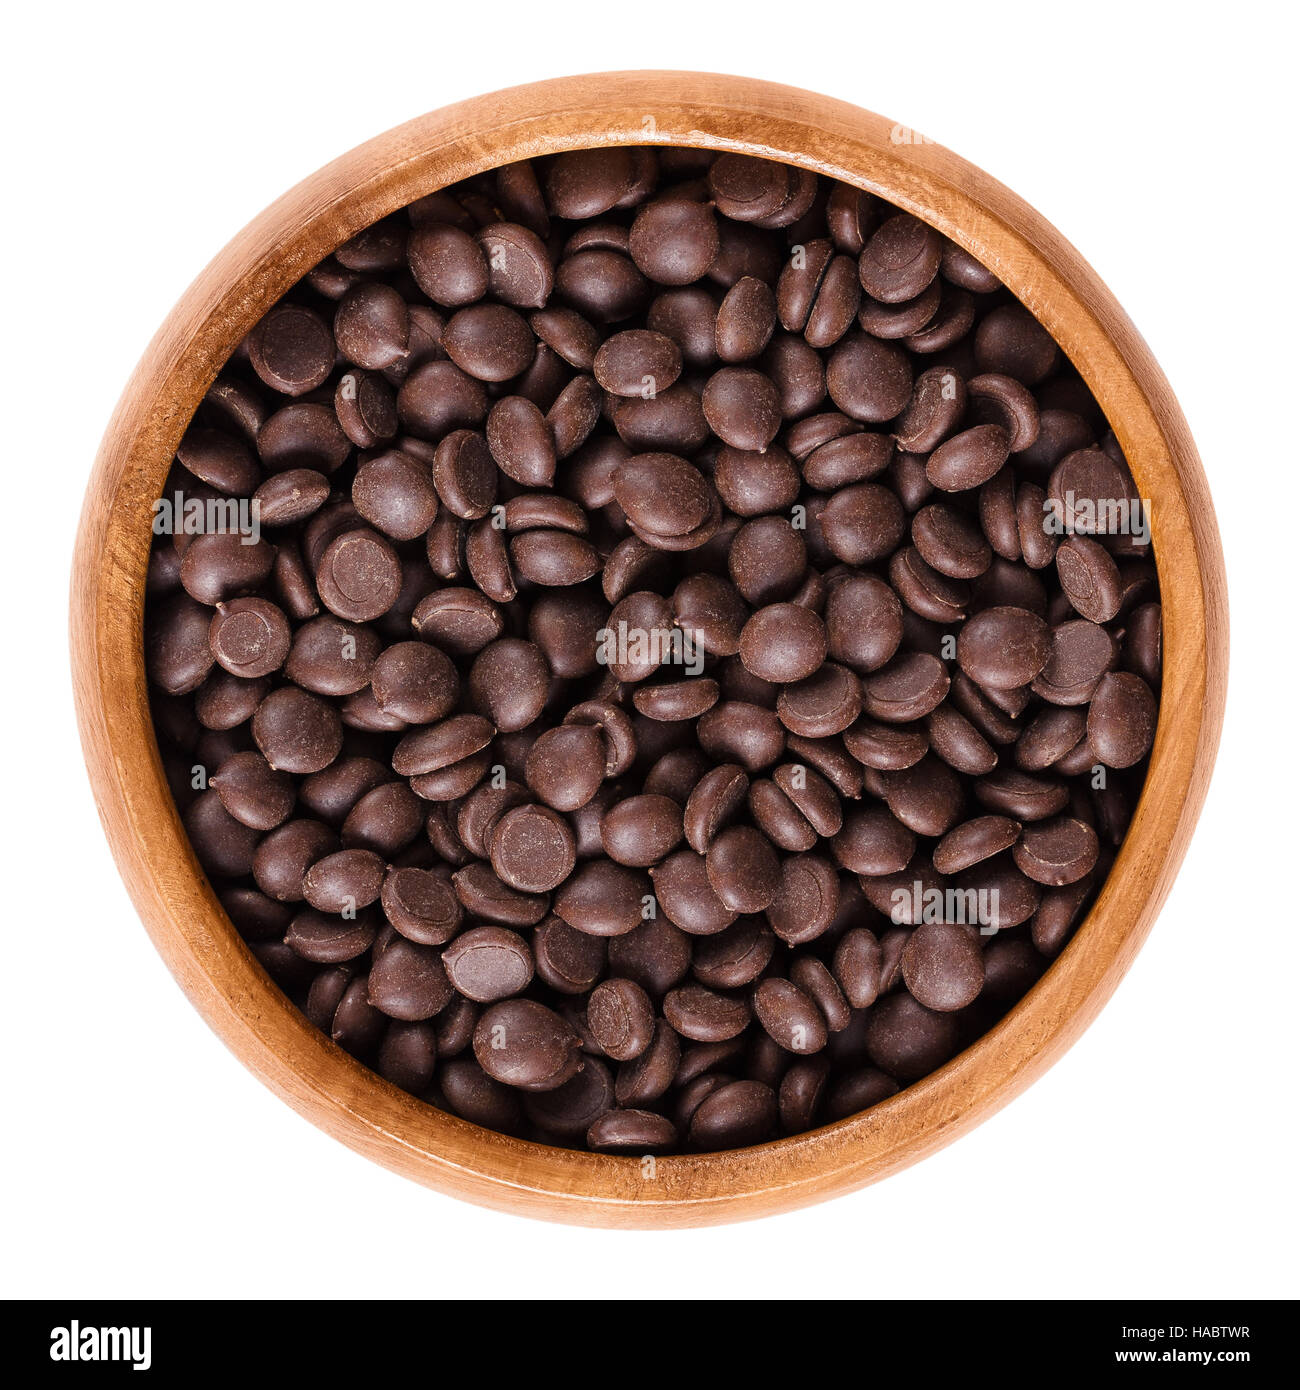 Dark chocolate drops in wooden bowl, ingredient used for cookies and muffins. Edible brown cocoa product. Isolated macro photo. Stock Photo